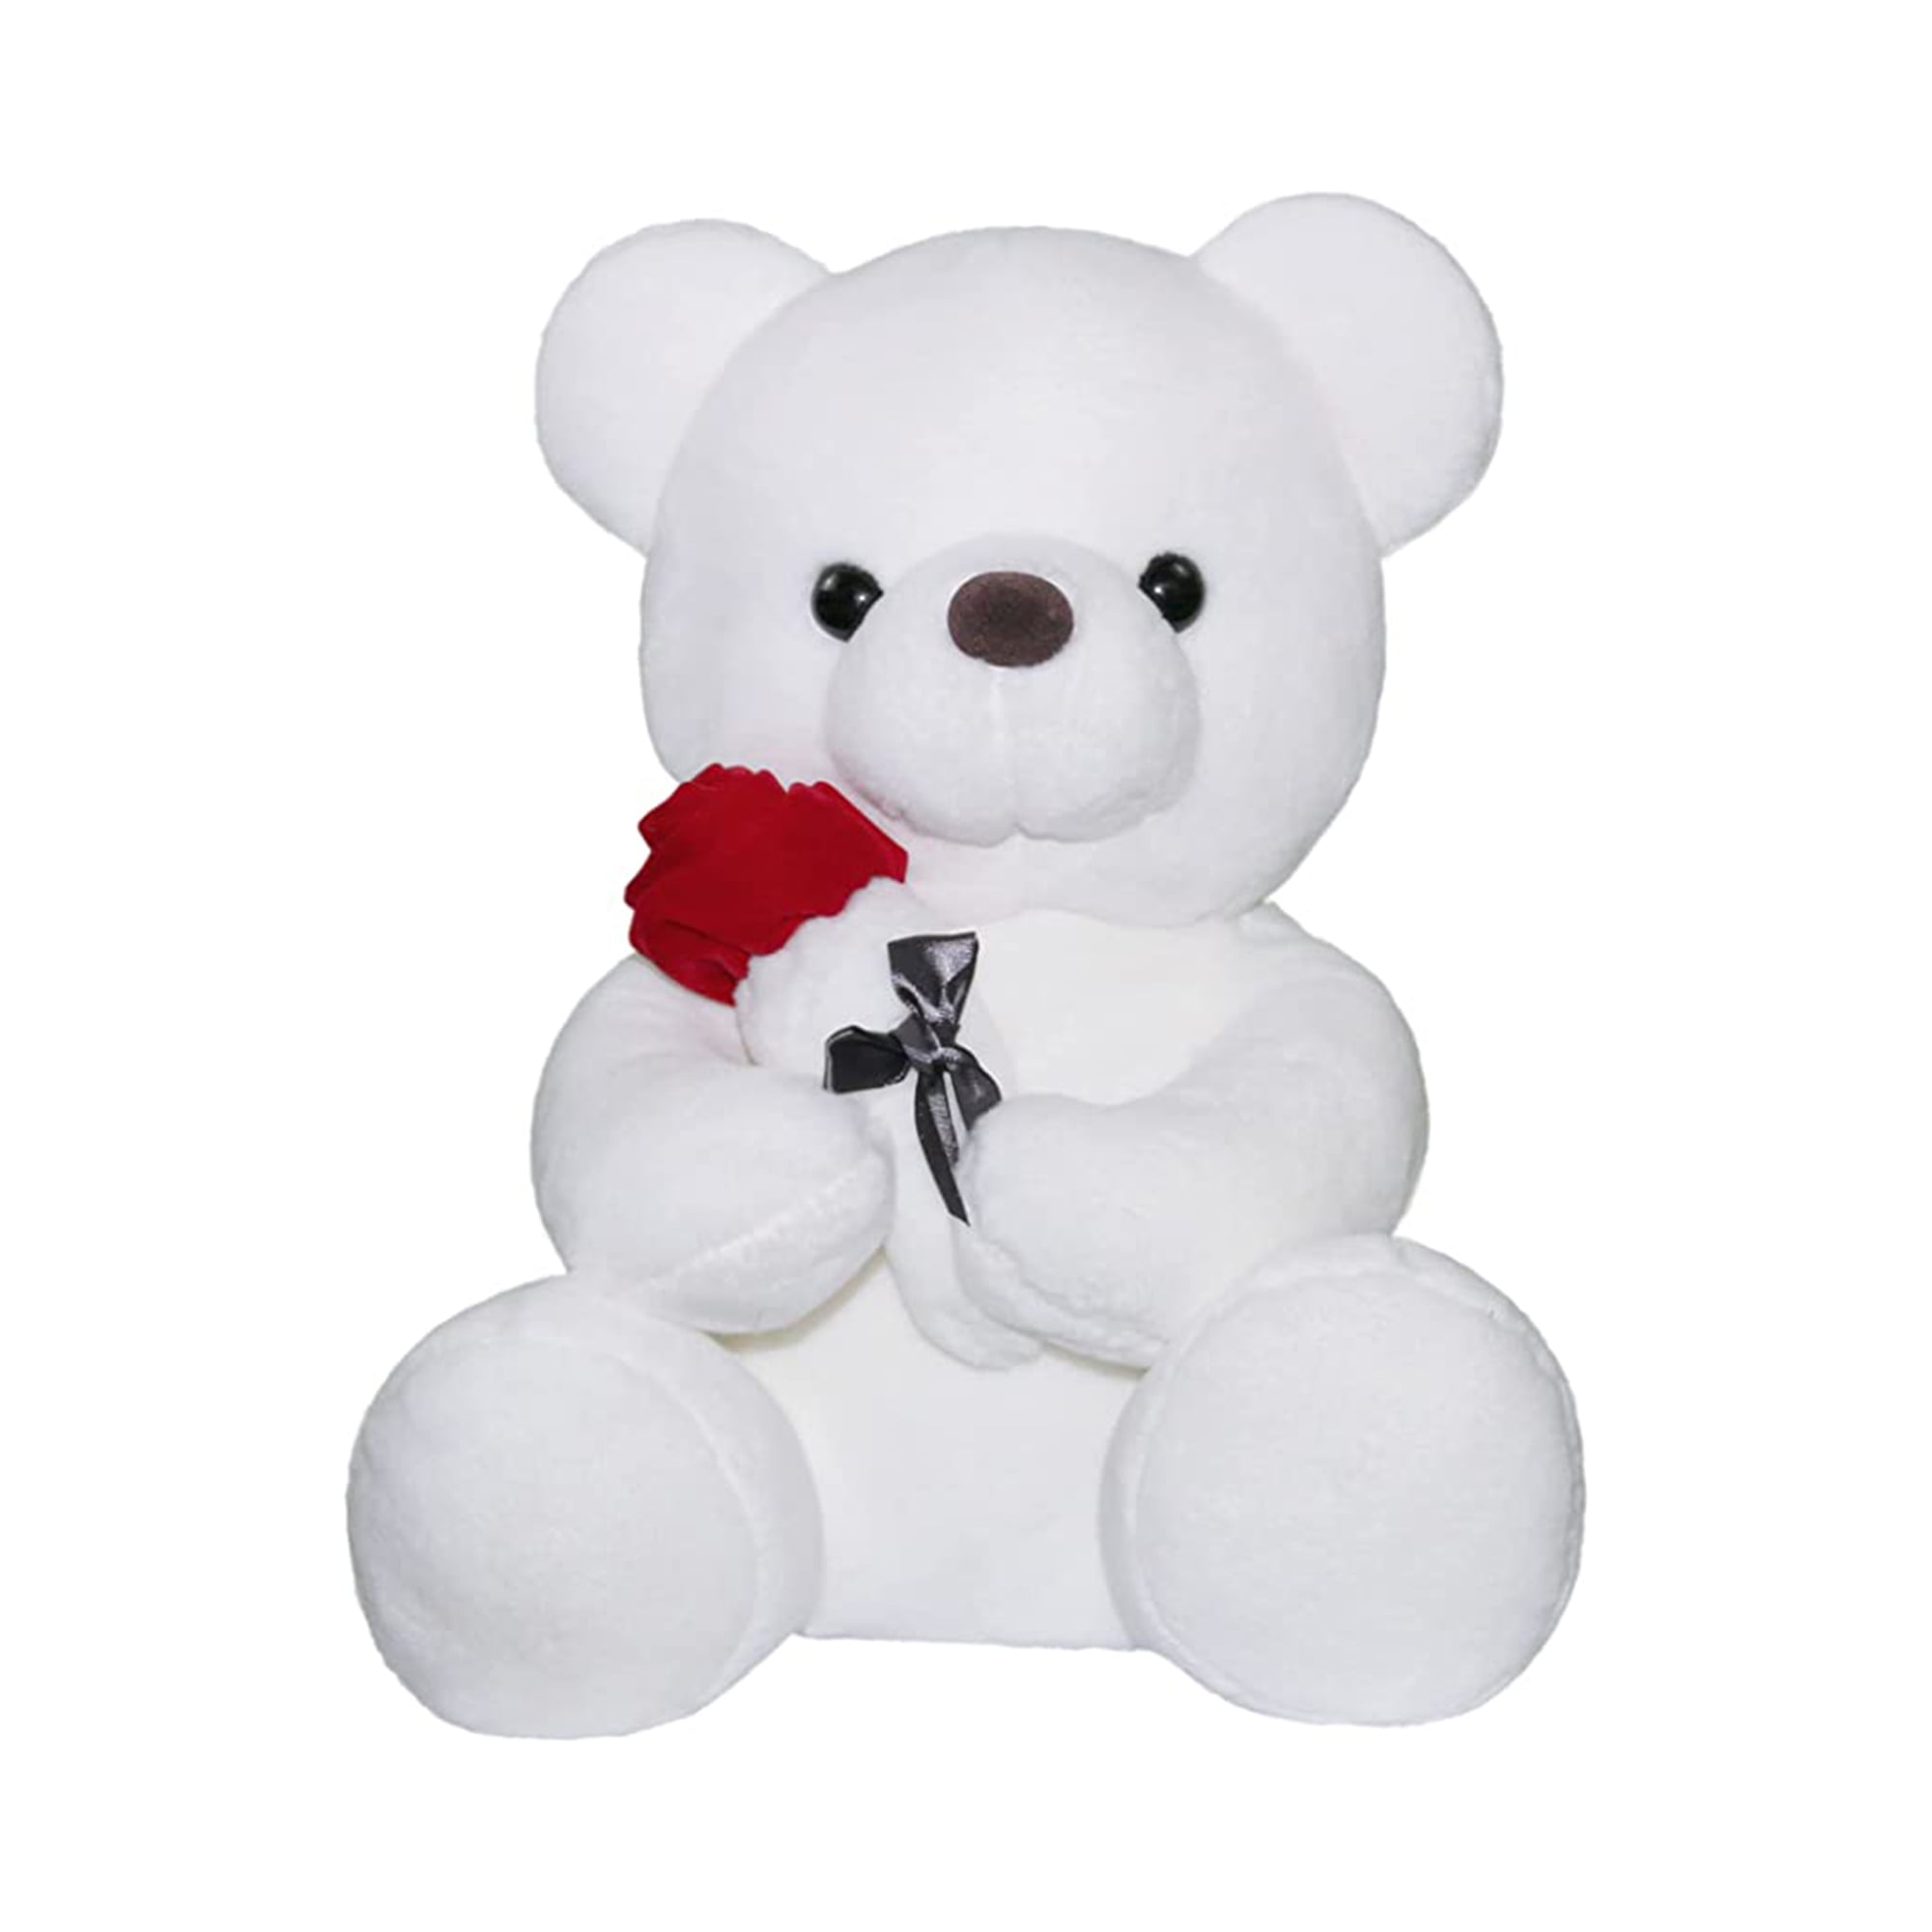 50cm Big Teddy Bear Plush Soft Toys Doll Heart White Only Cover No Cotton Gift 